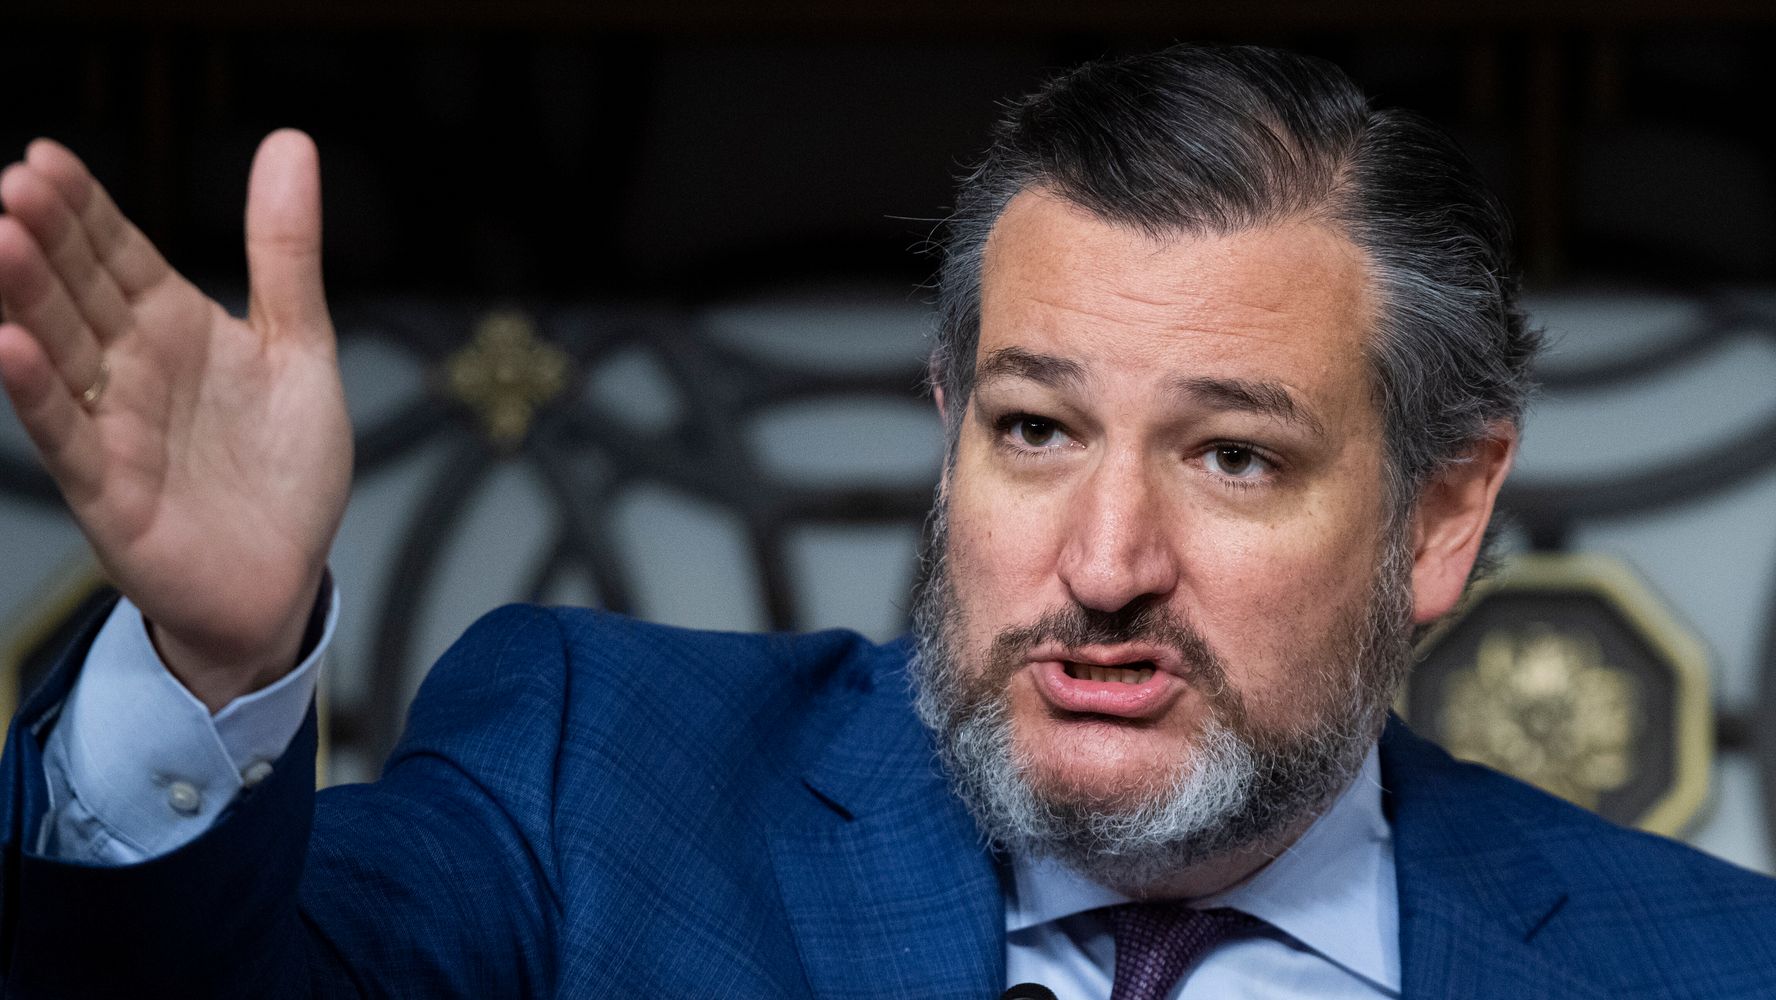 Ted Cruz Tells People To 'Get A Job' And Twitter Works Him Over